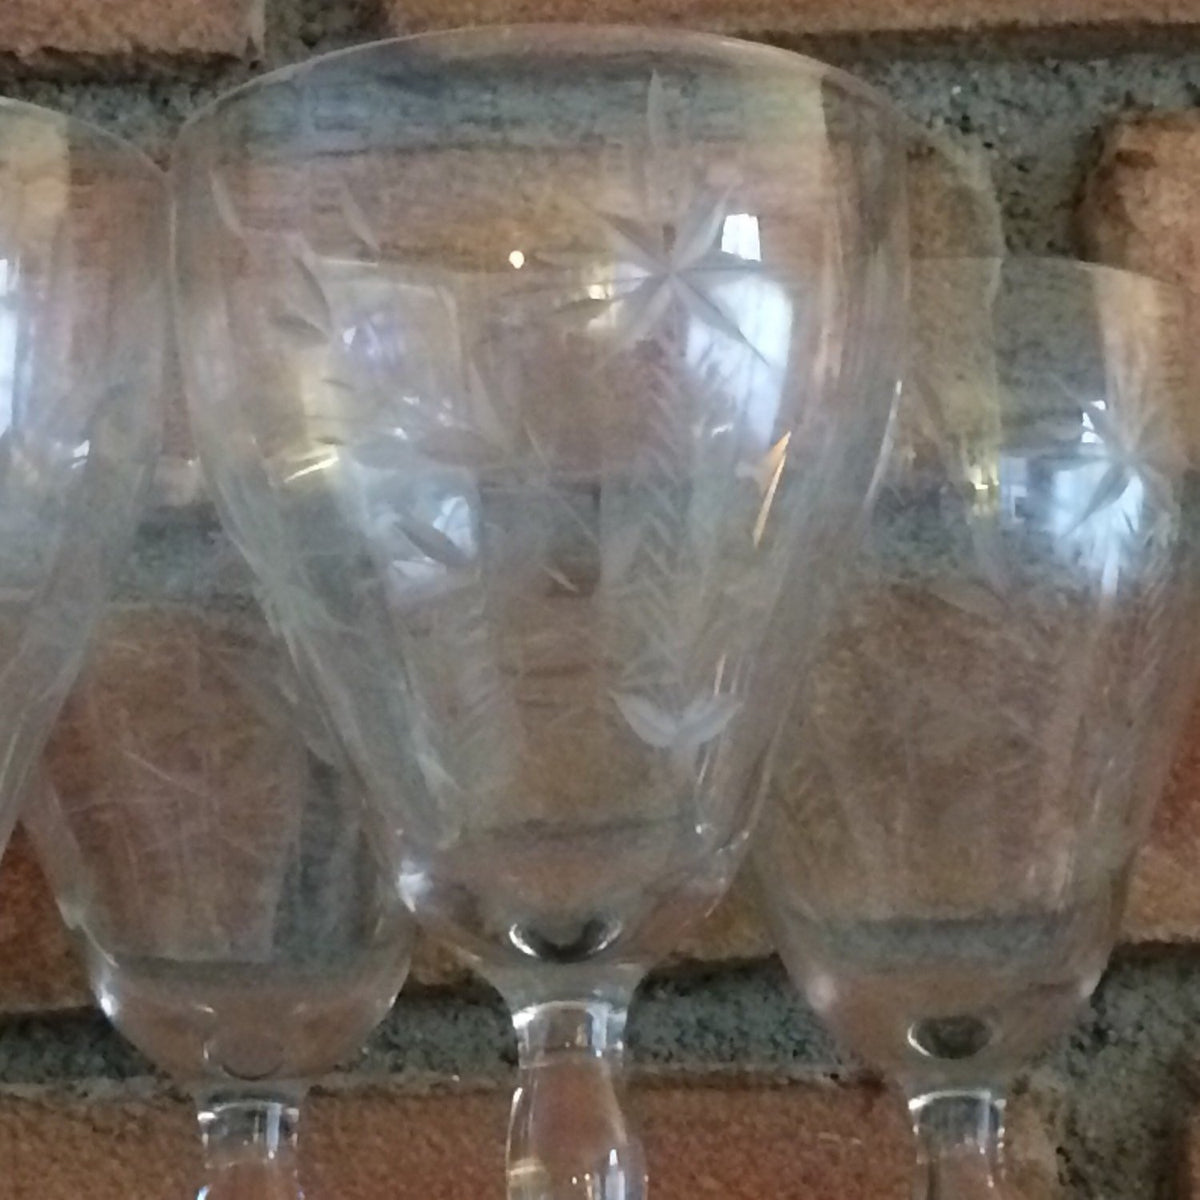 Vintage Wine Glasses. Glassware Ornate Etched Crystal Clear Tall Water